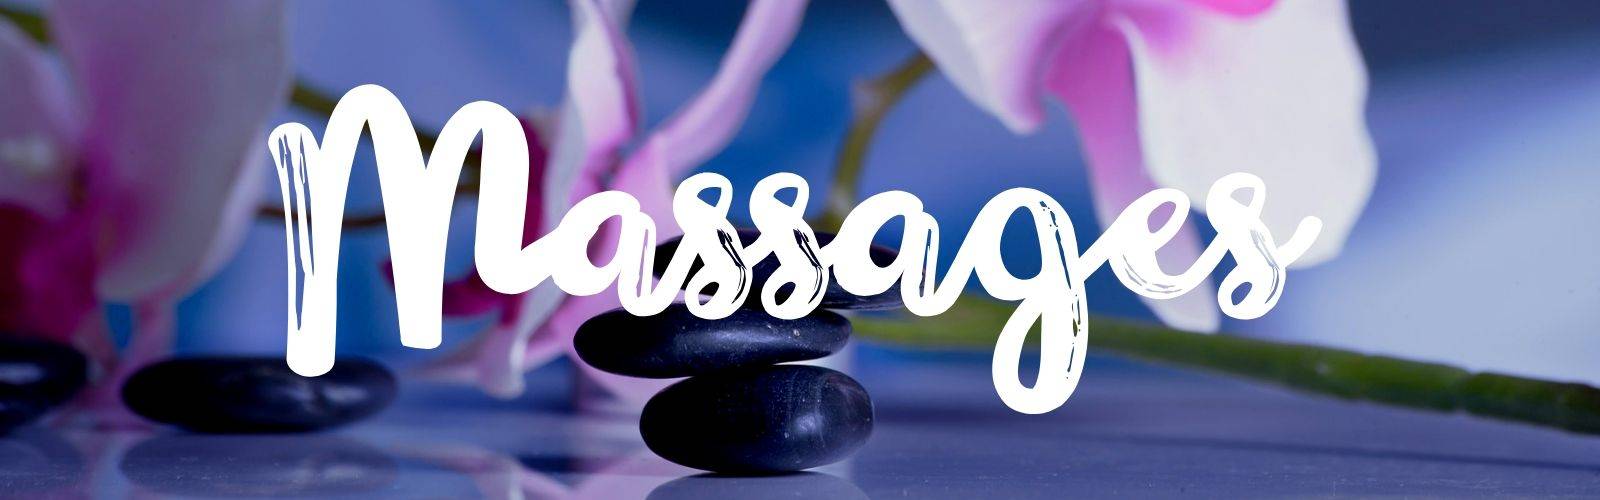 MAssages in Hot Springs AR | Thai-Me Spa | Two Locations in Hot Springs, AR